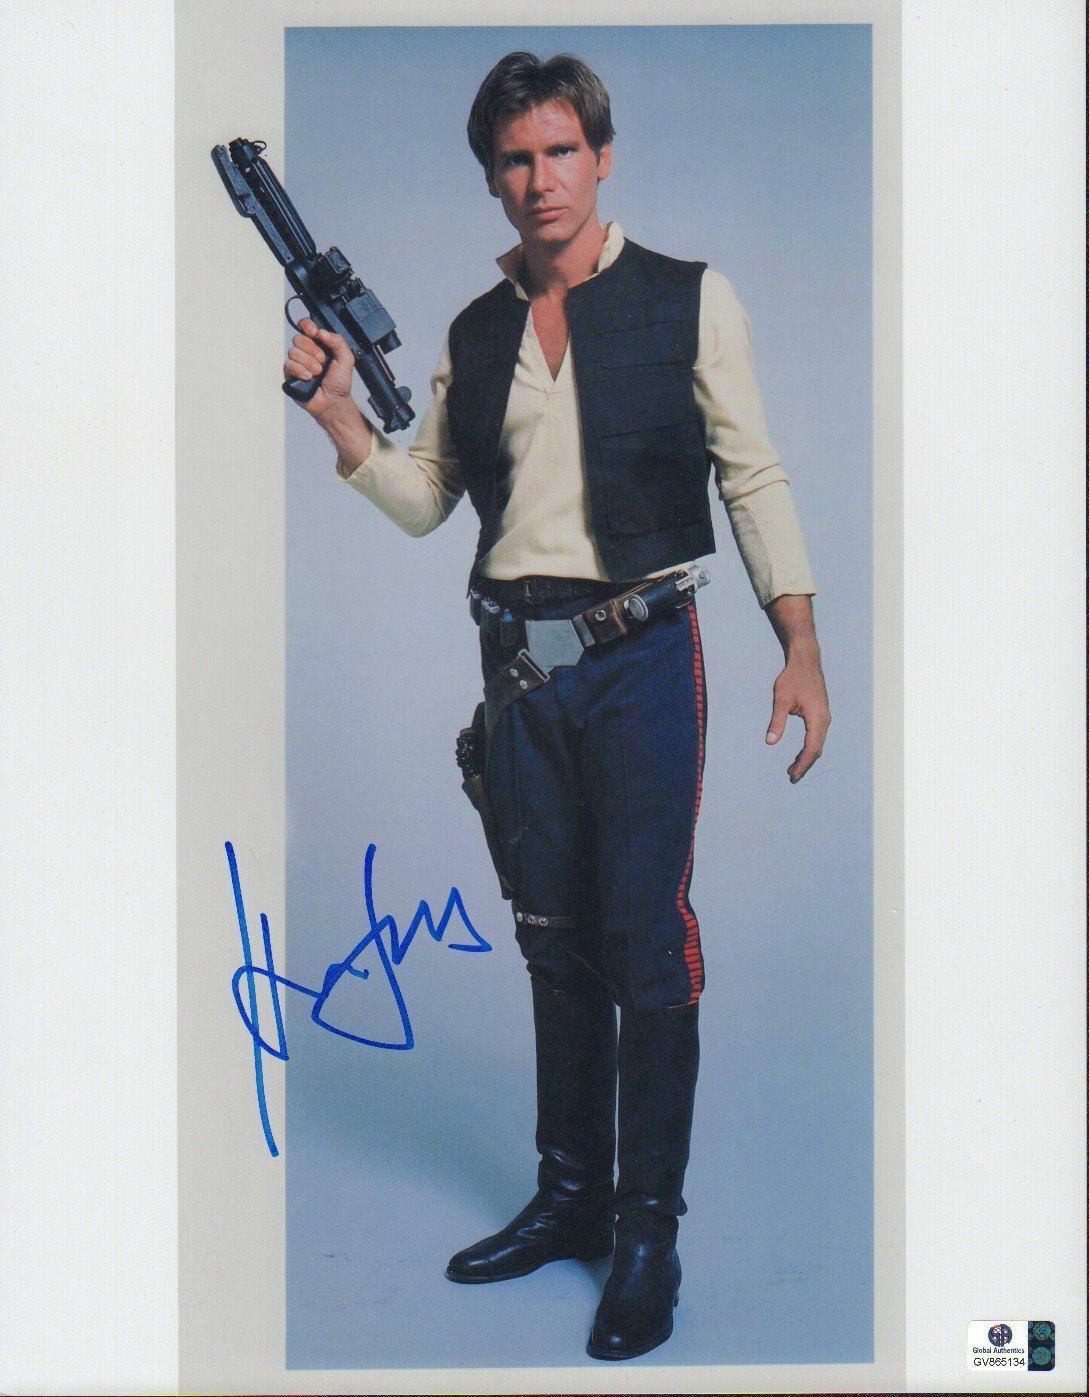 HARRISON FORD Signed 'Han Solo' Photo Poster paintinggraph - Film Star Actor - preprint